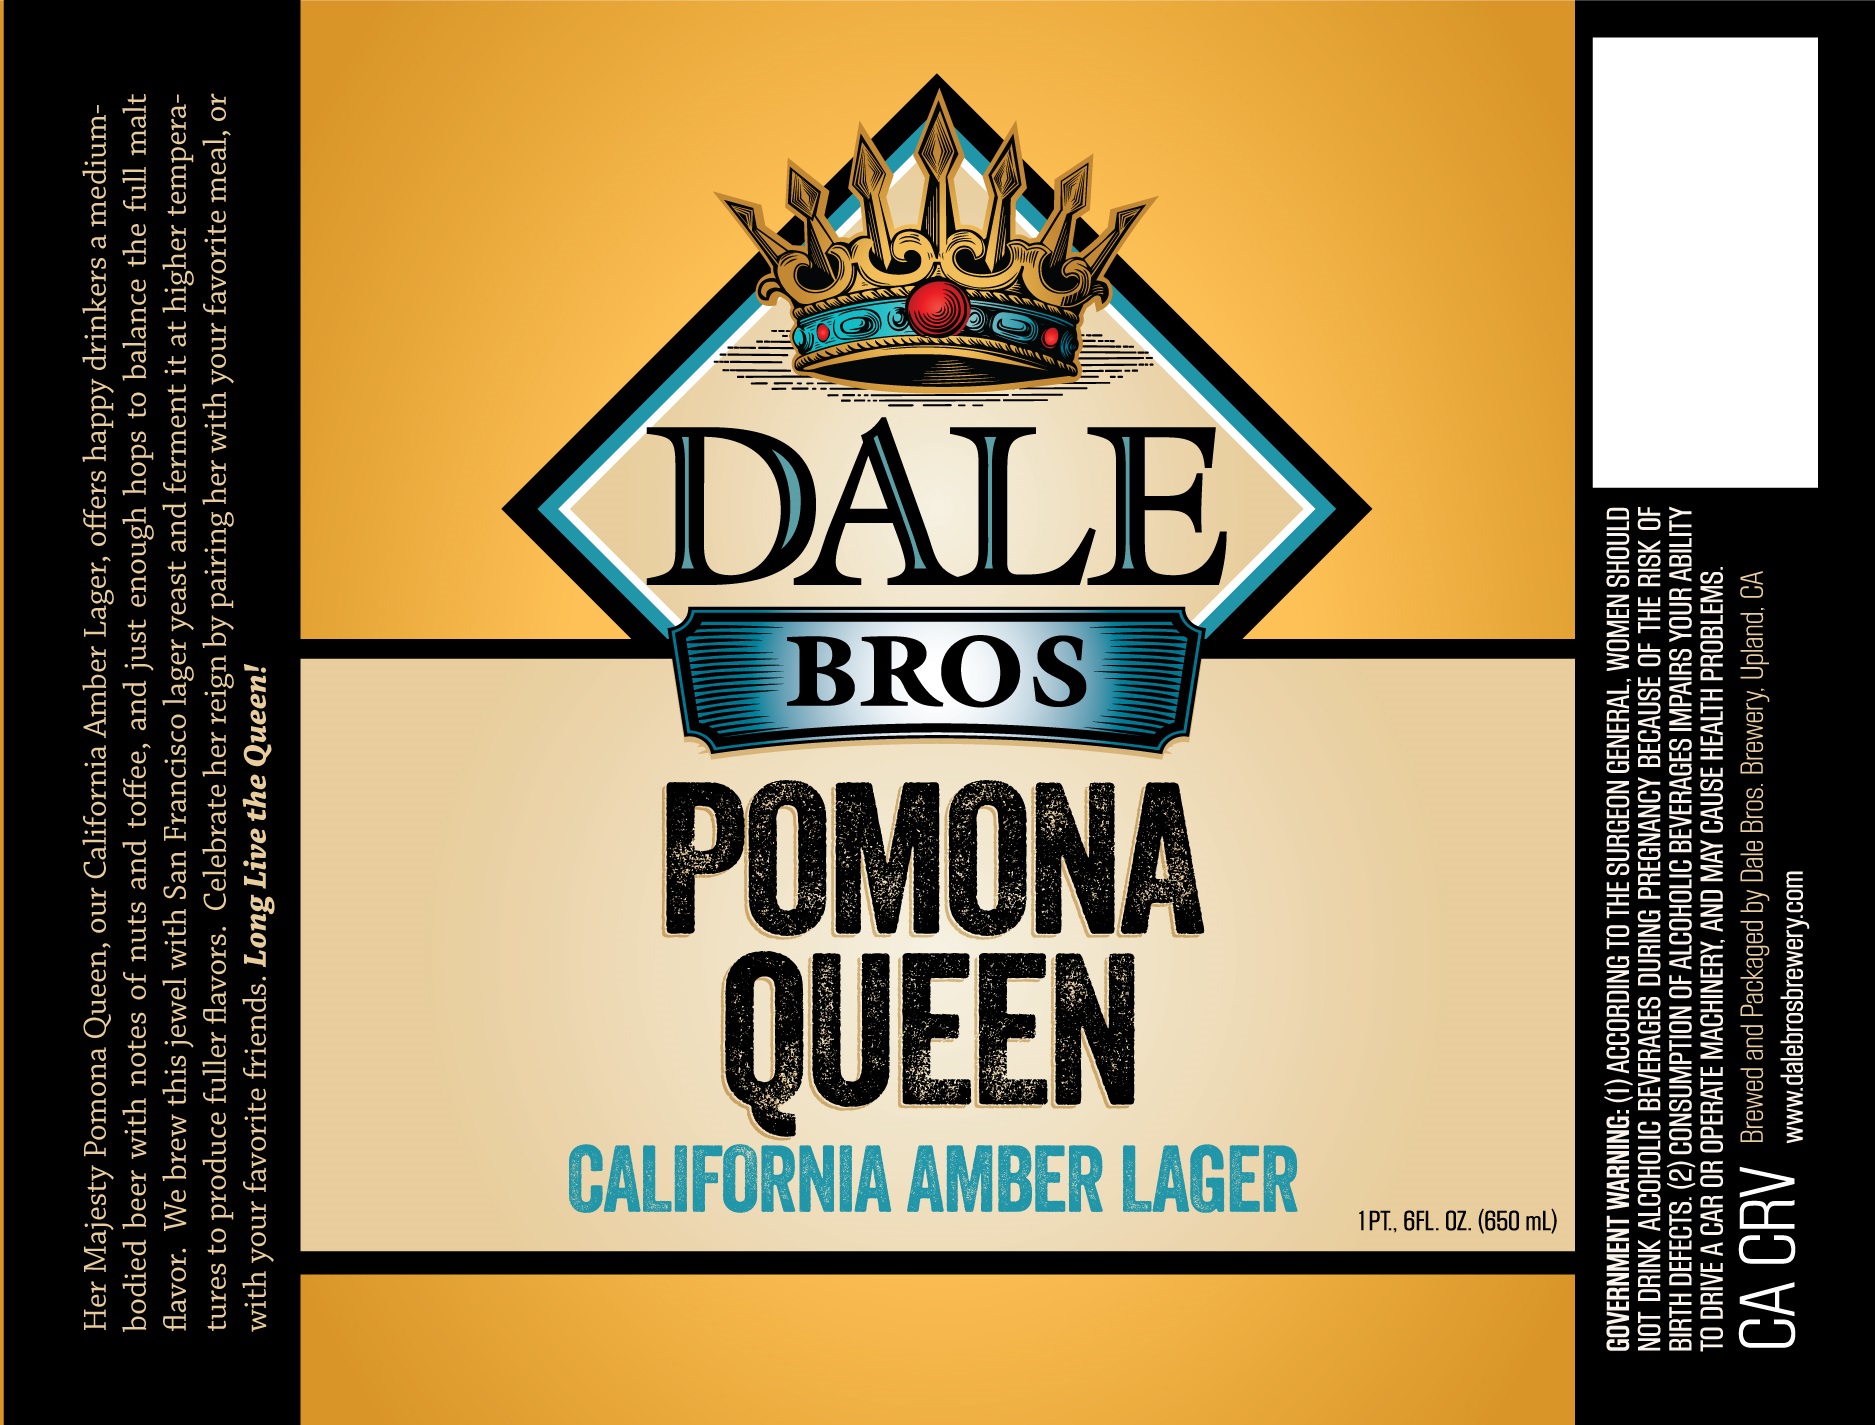 Dale Brothers Pomona Queen California Amber Lager